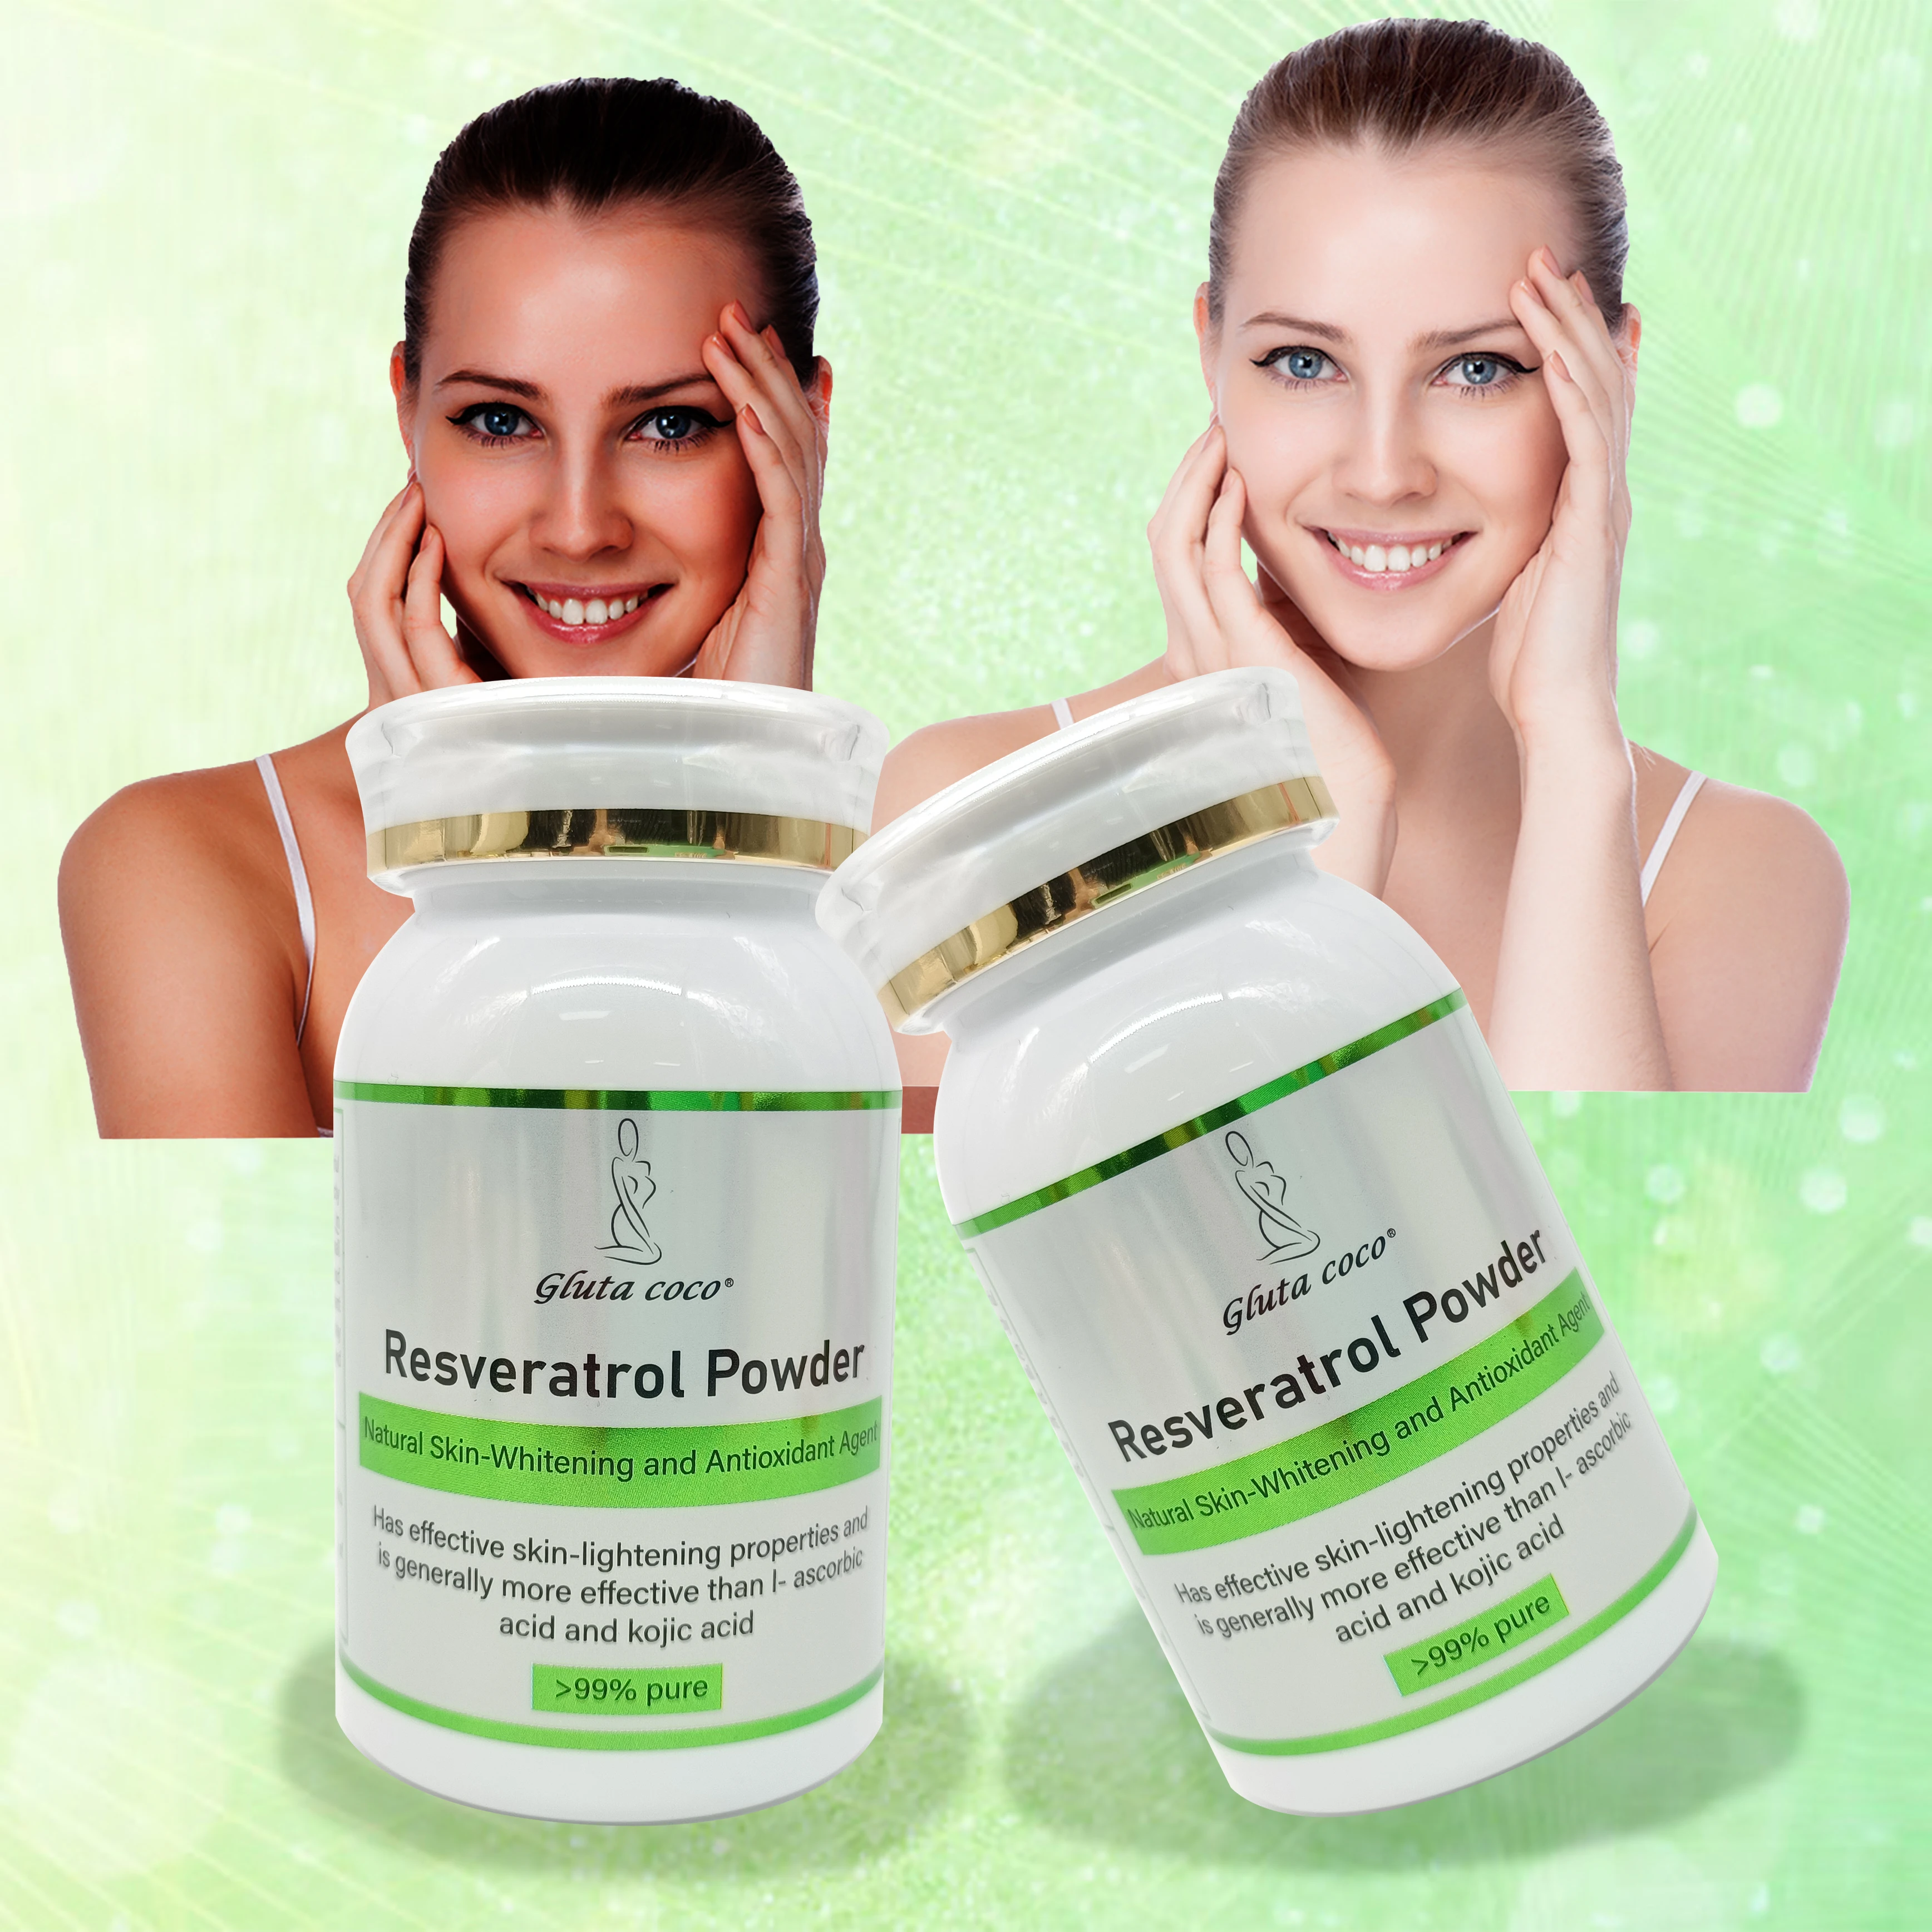 

Resveratrol Powder Skin-Whitening and Antioxidant Agent skin-lightening facial and body care product works in 2 weeks